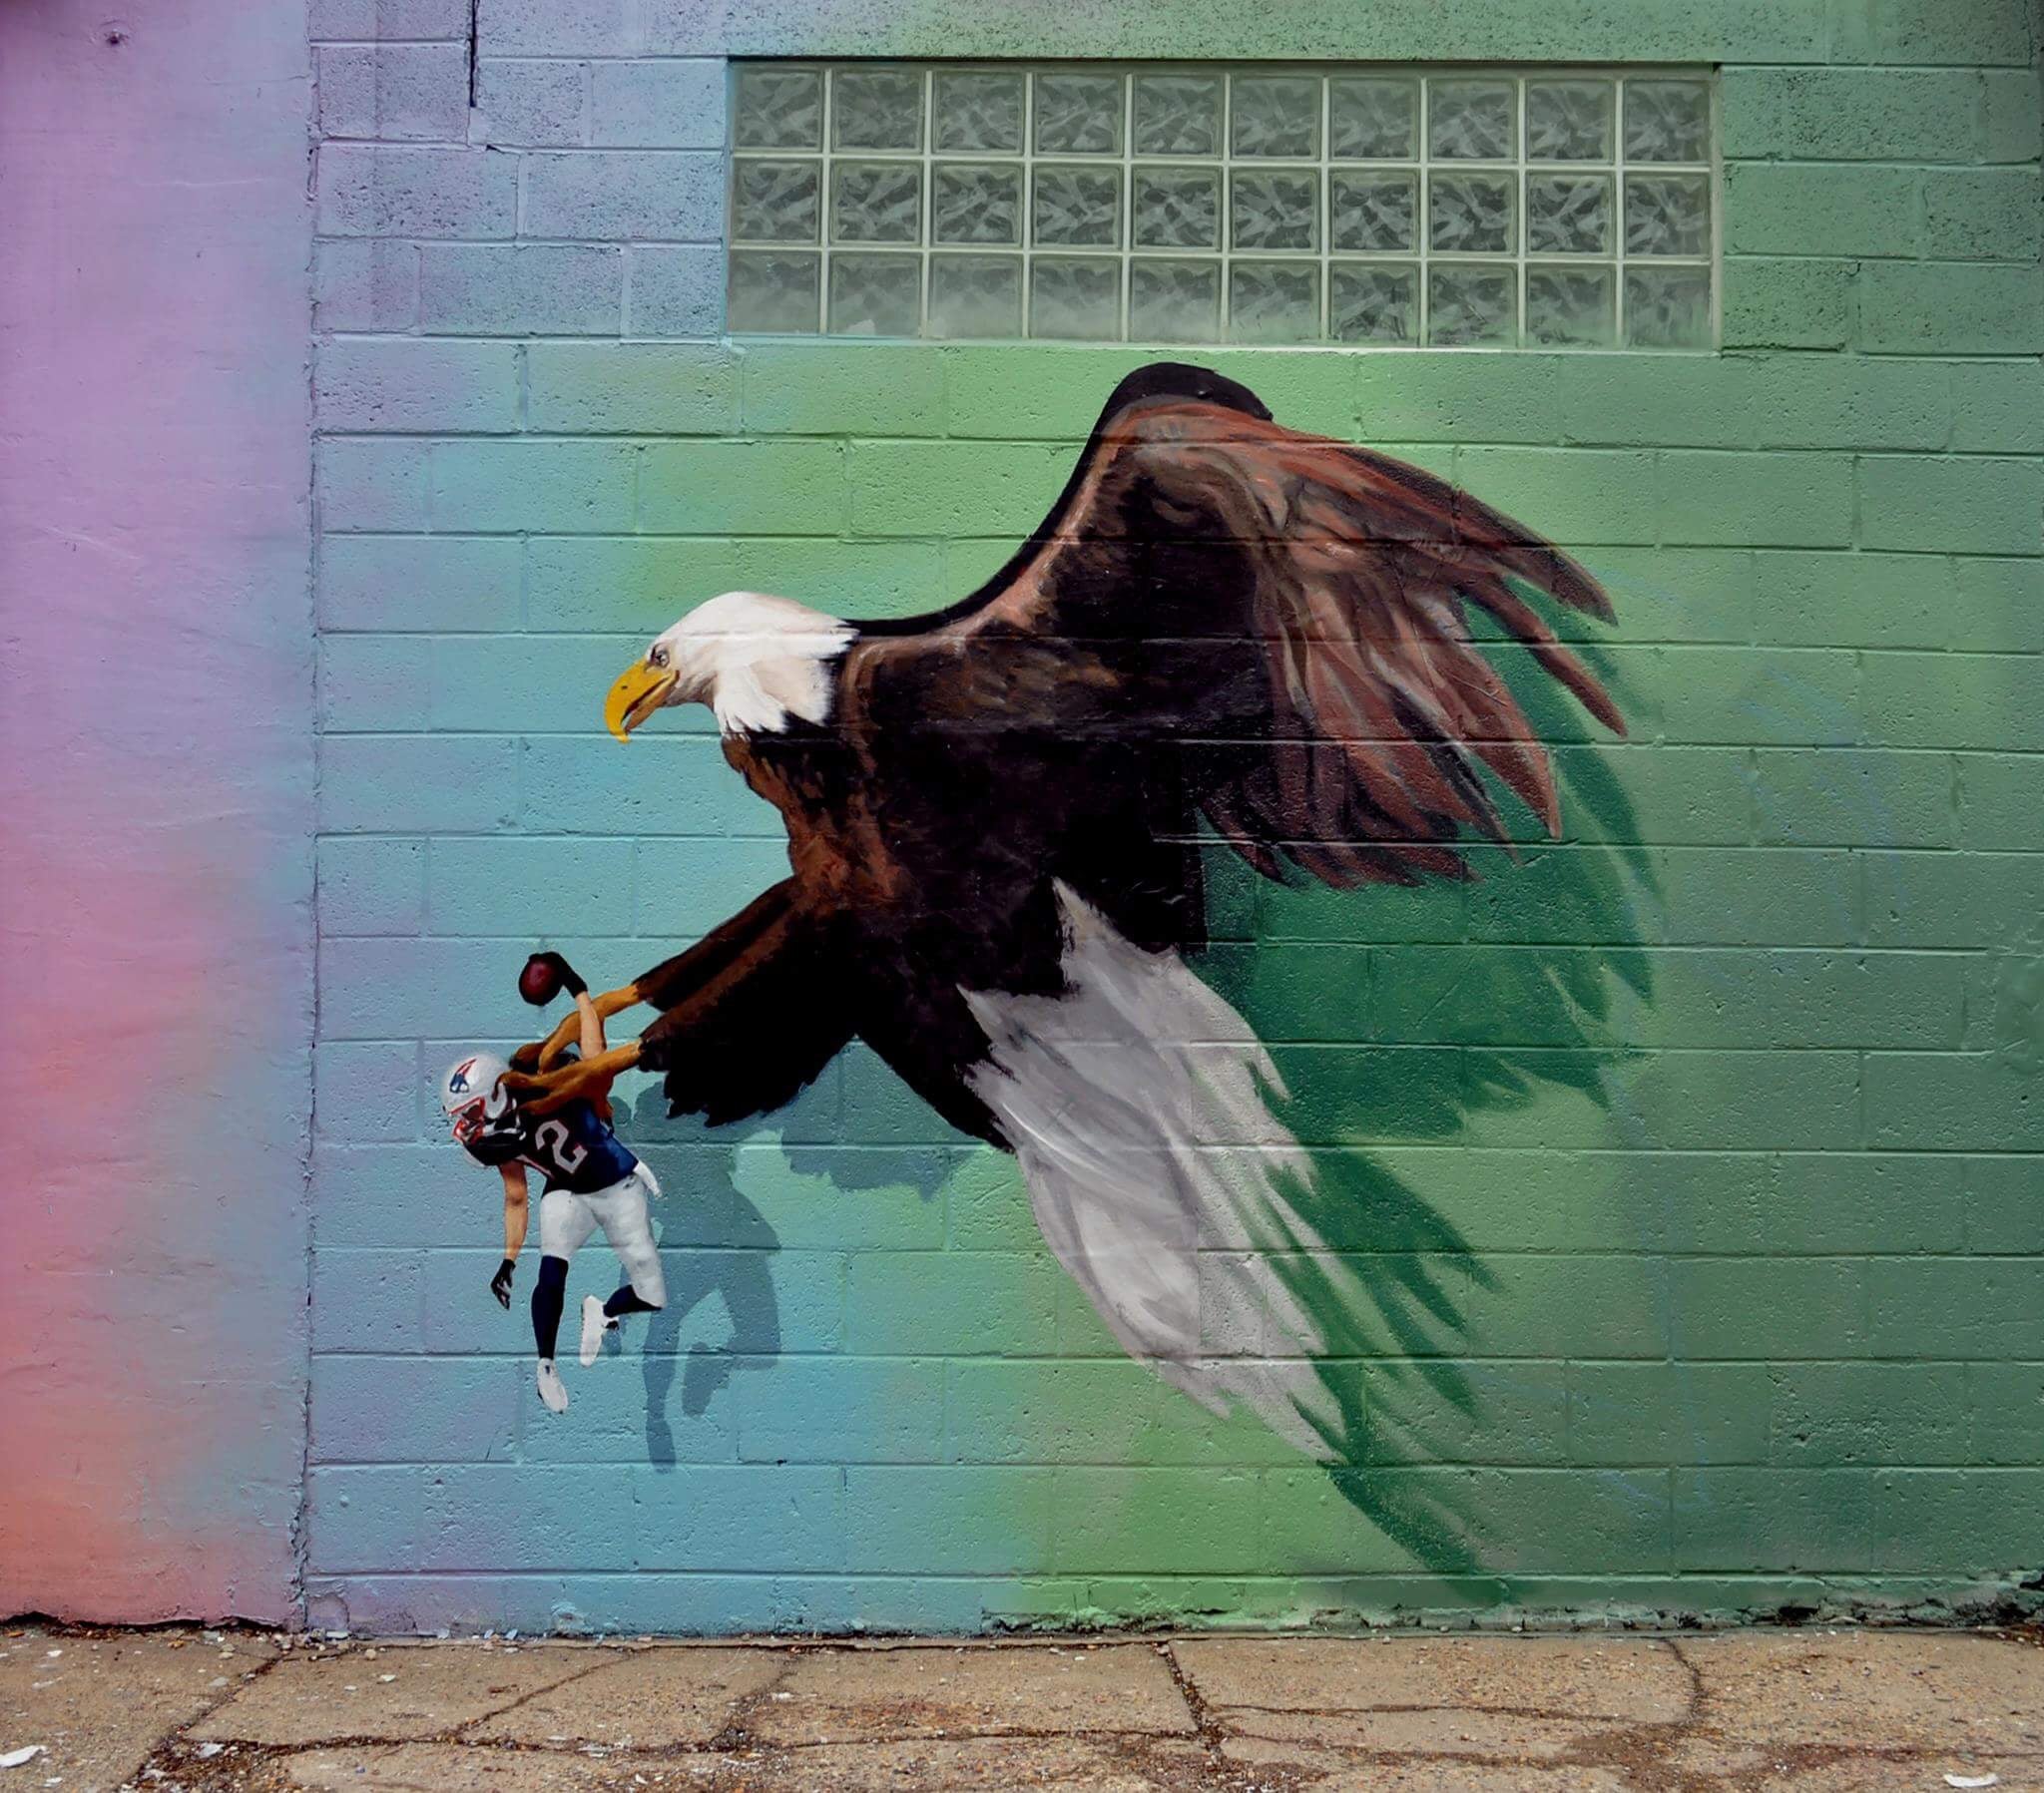 Mural of the story: In clutch situation, Eagles overpower 